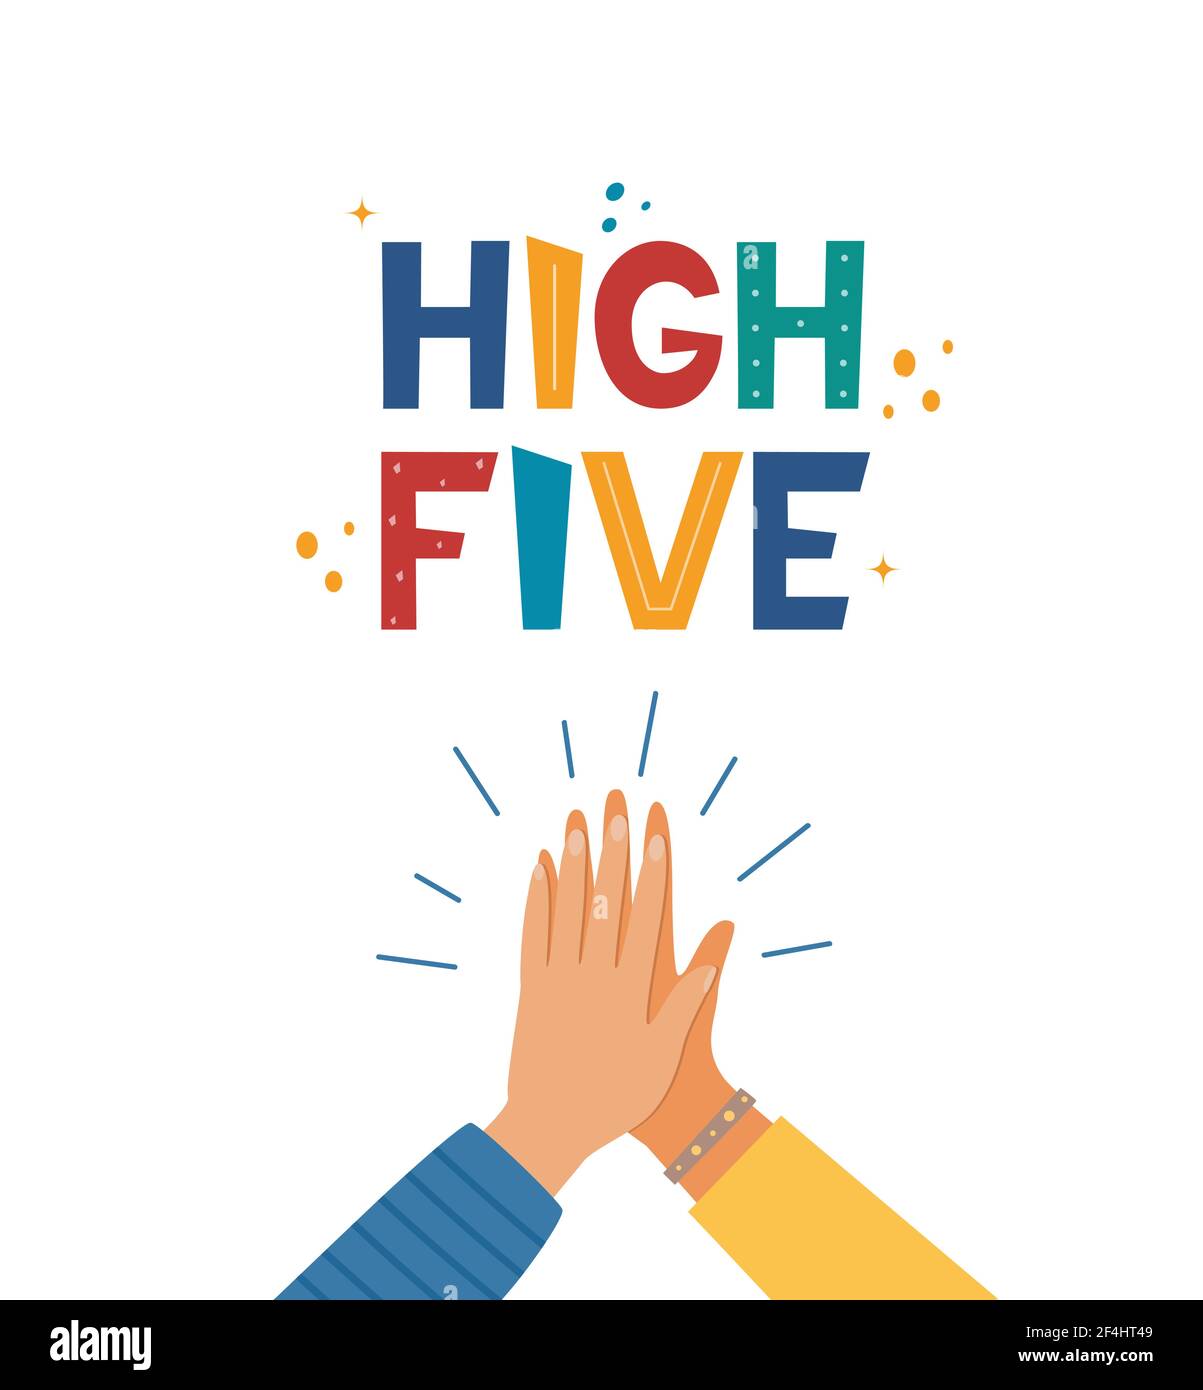 High five hand drawn lettering. Two hands clapping in high five gesture. Teamwork, friendship, unity, support, partnership, community. Concept for pos Stock Vector